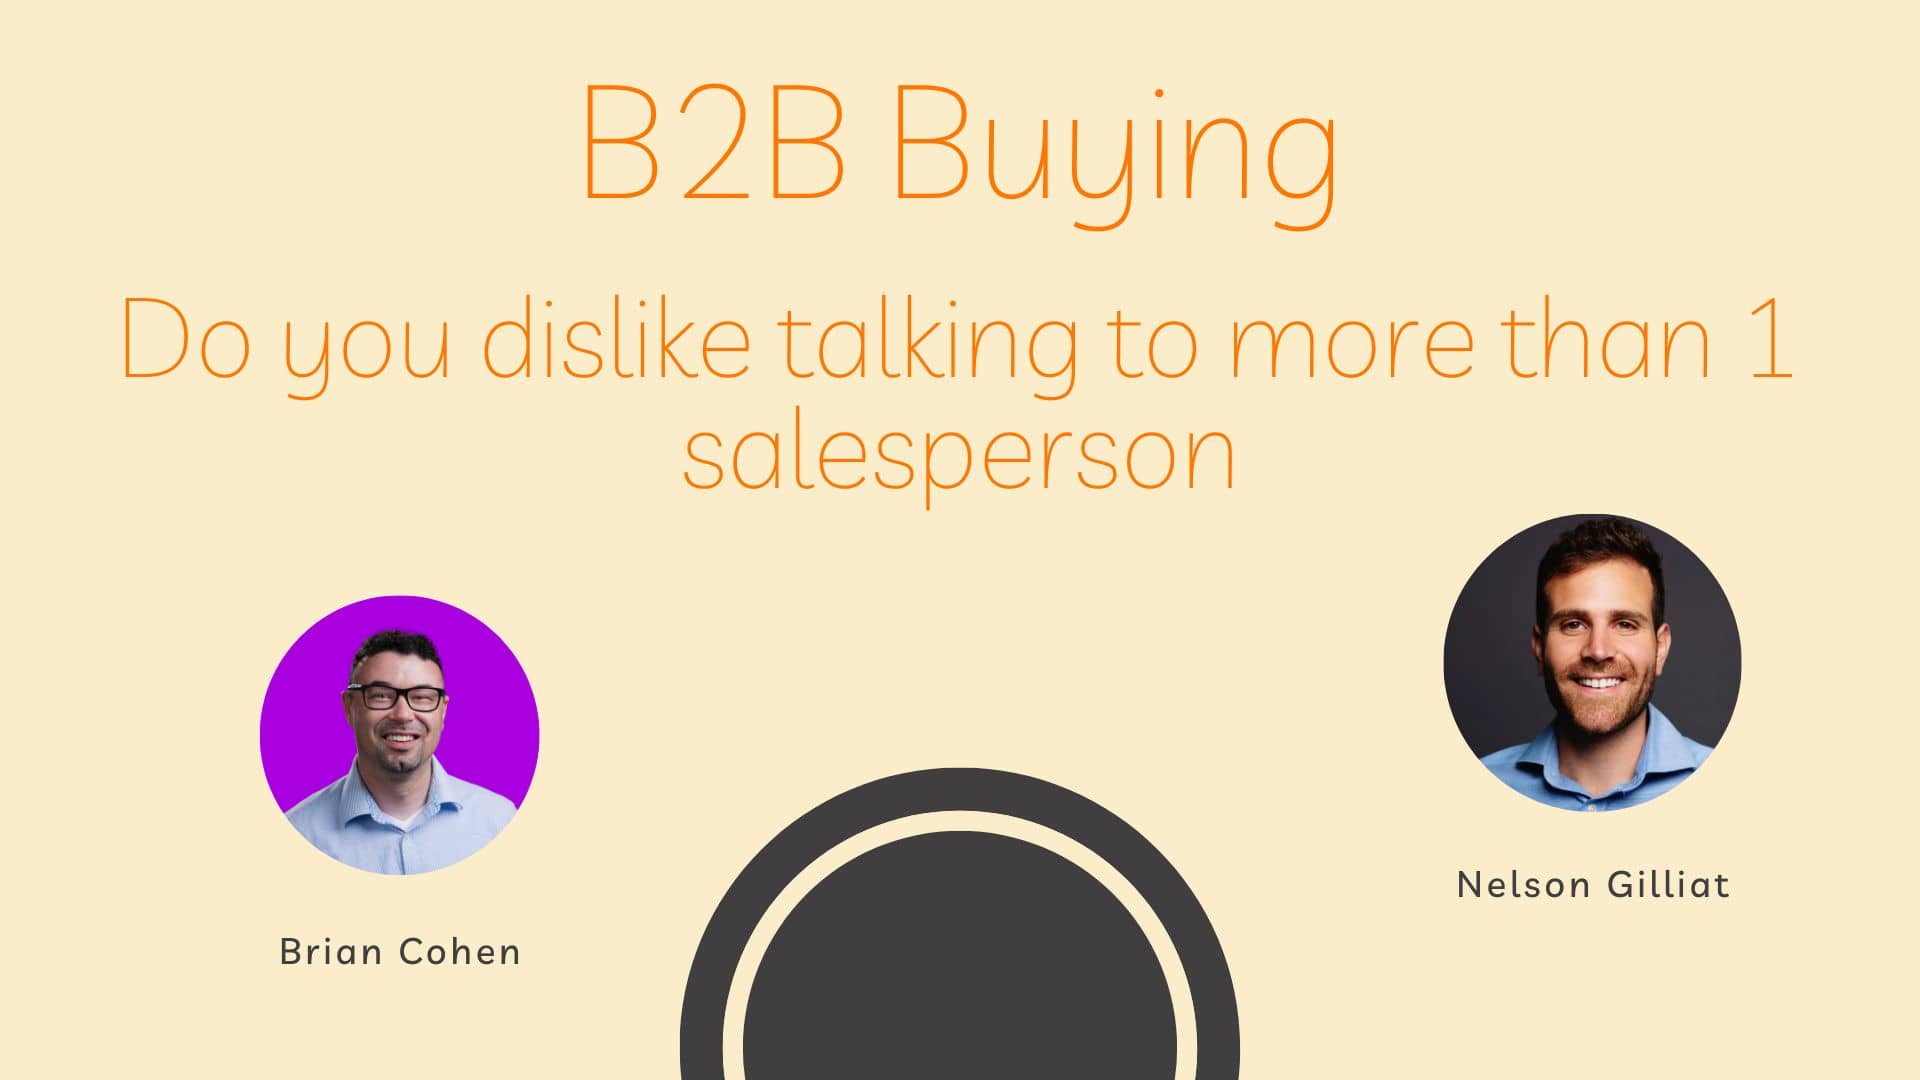 B2B Buying - Do you dislike talking to more than 1 salesperson